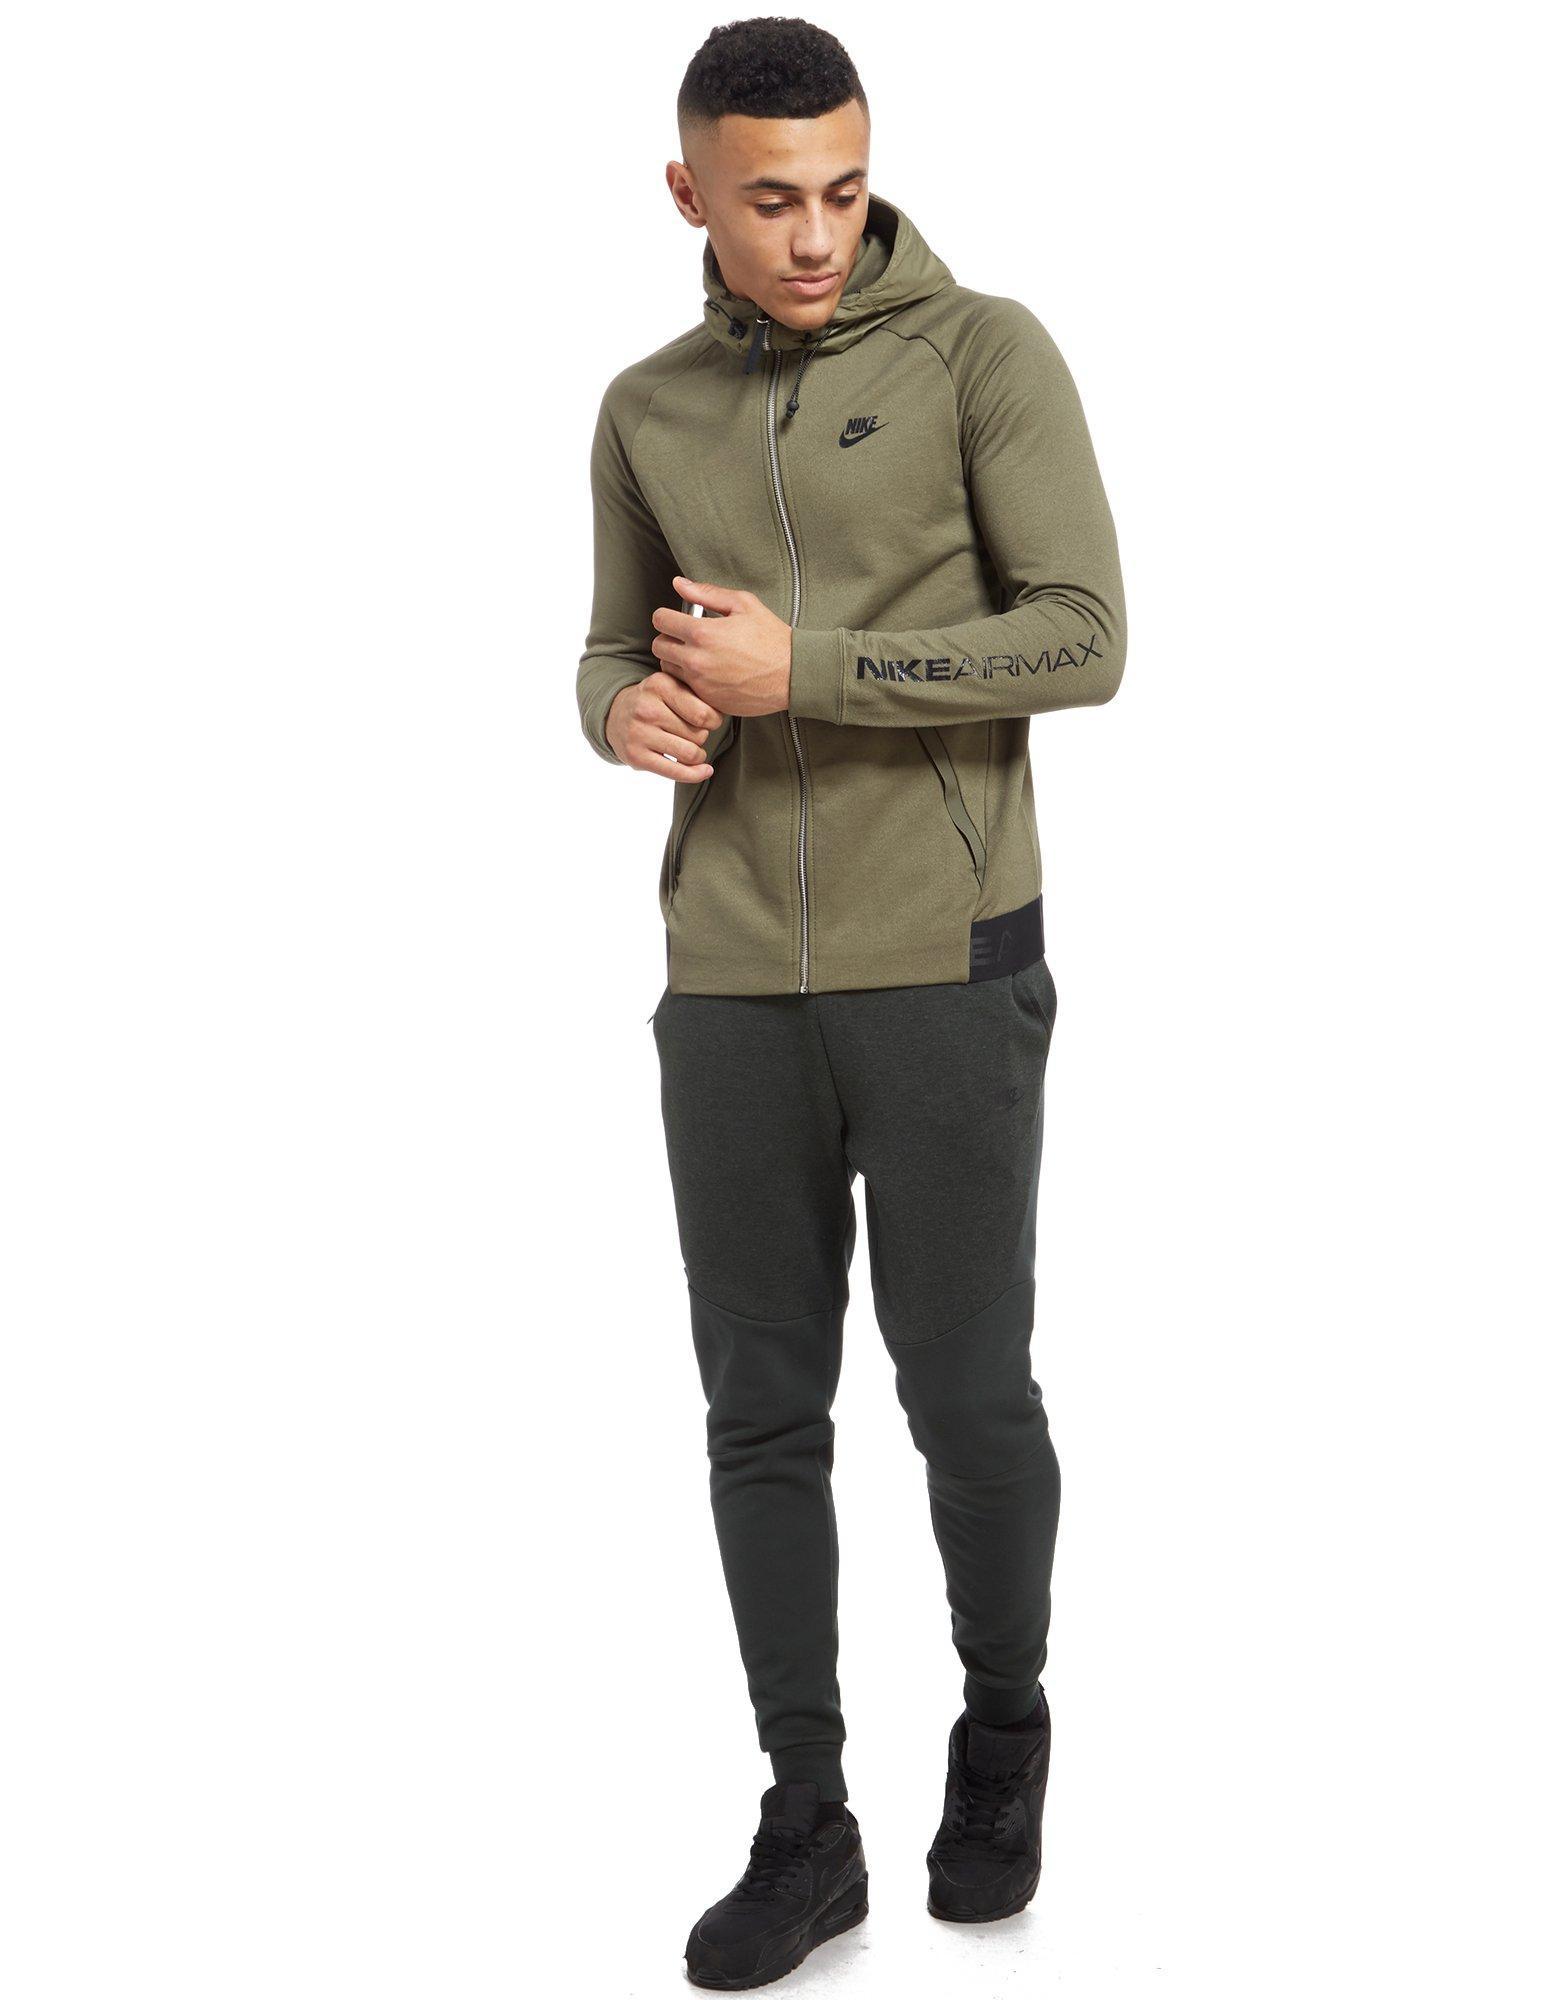 Nike Cotton Air Max Full Zip Hoodie in Olive (Green) for Men - Lyst